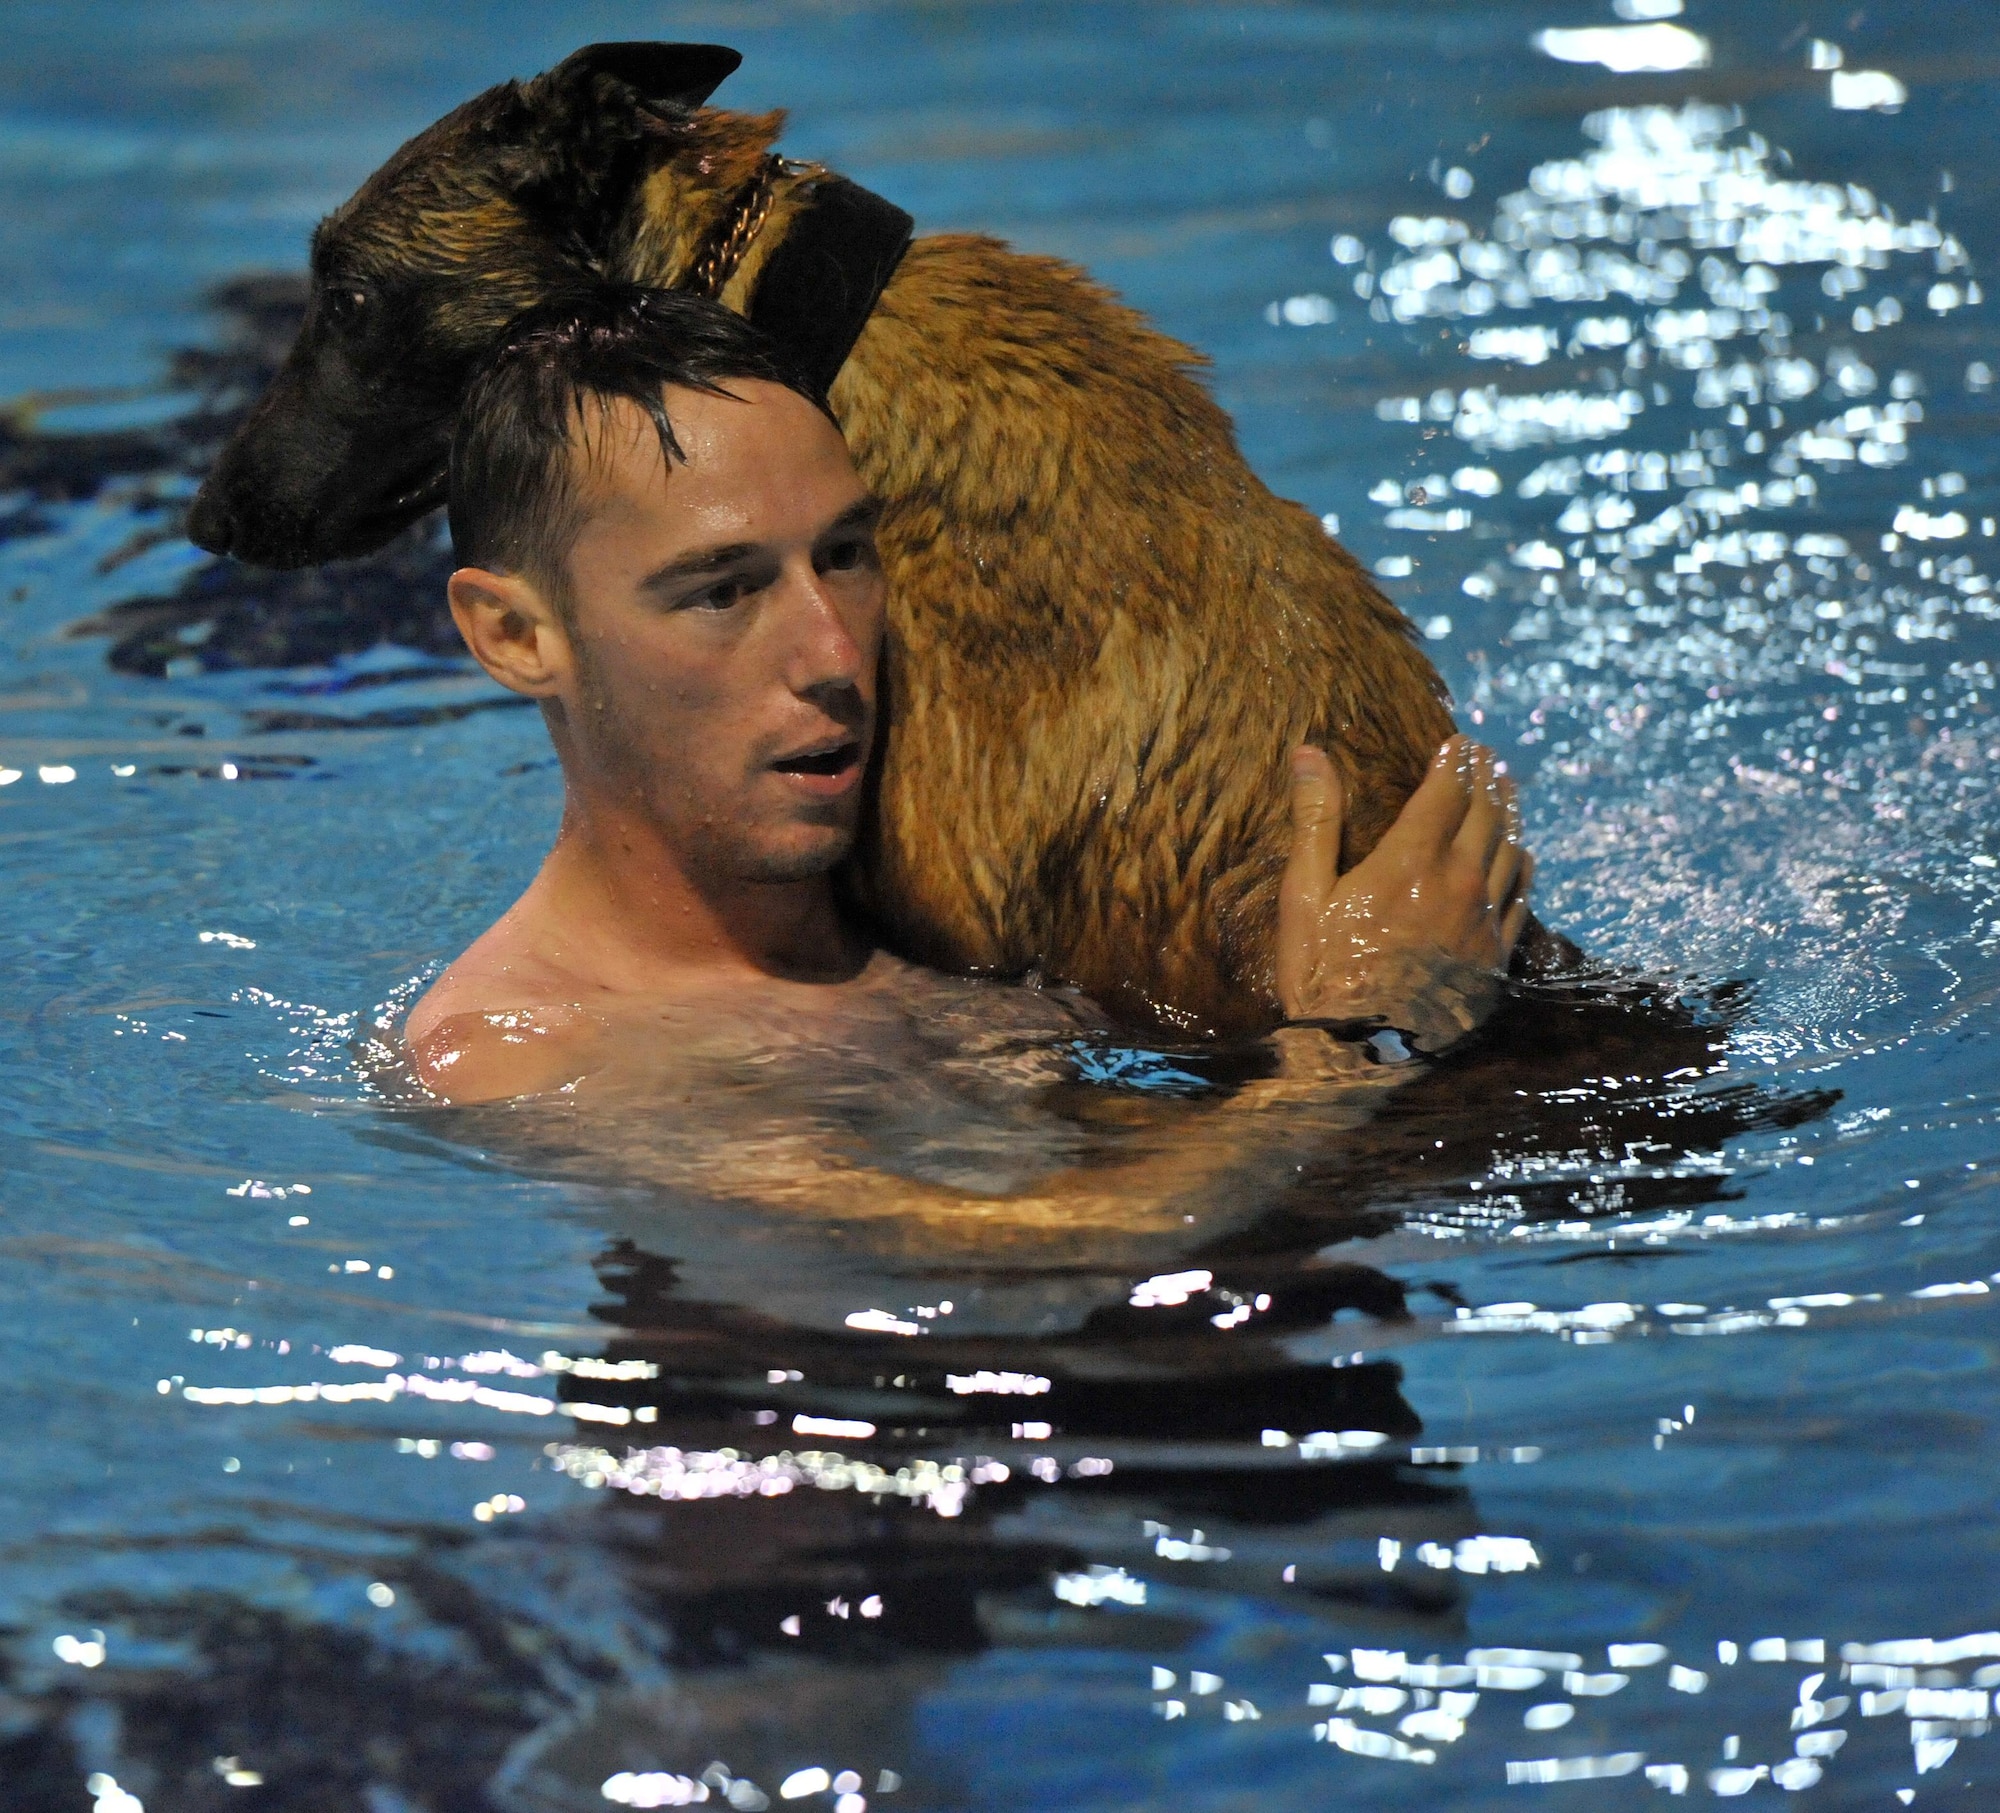 Staff Sgt. Kenten, a 380th Expeditionary Security Forces Squadron military working dog handler, carries his K9 partner, Ppixie, age three, during annual water-based aggression training at the base pool at undisclosed location in Southwest Asia, Jan. 18, 2016. In addition to water familiarization, military working dog handlers said the training allowed dogs and their handlers to strengthen their bonds. (U.S. Air Force photo by Staff Sgt. Kentavist P. Brackin/released)